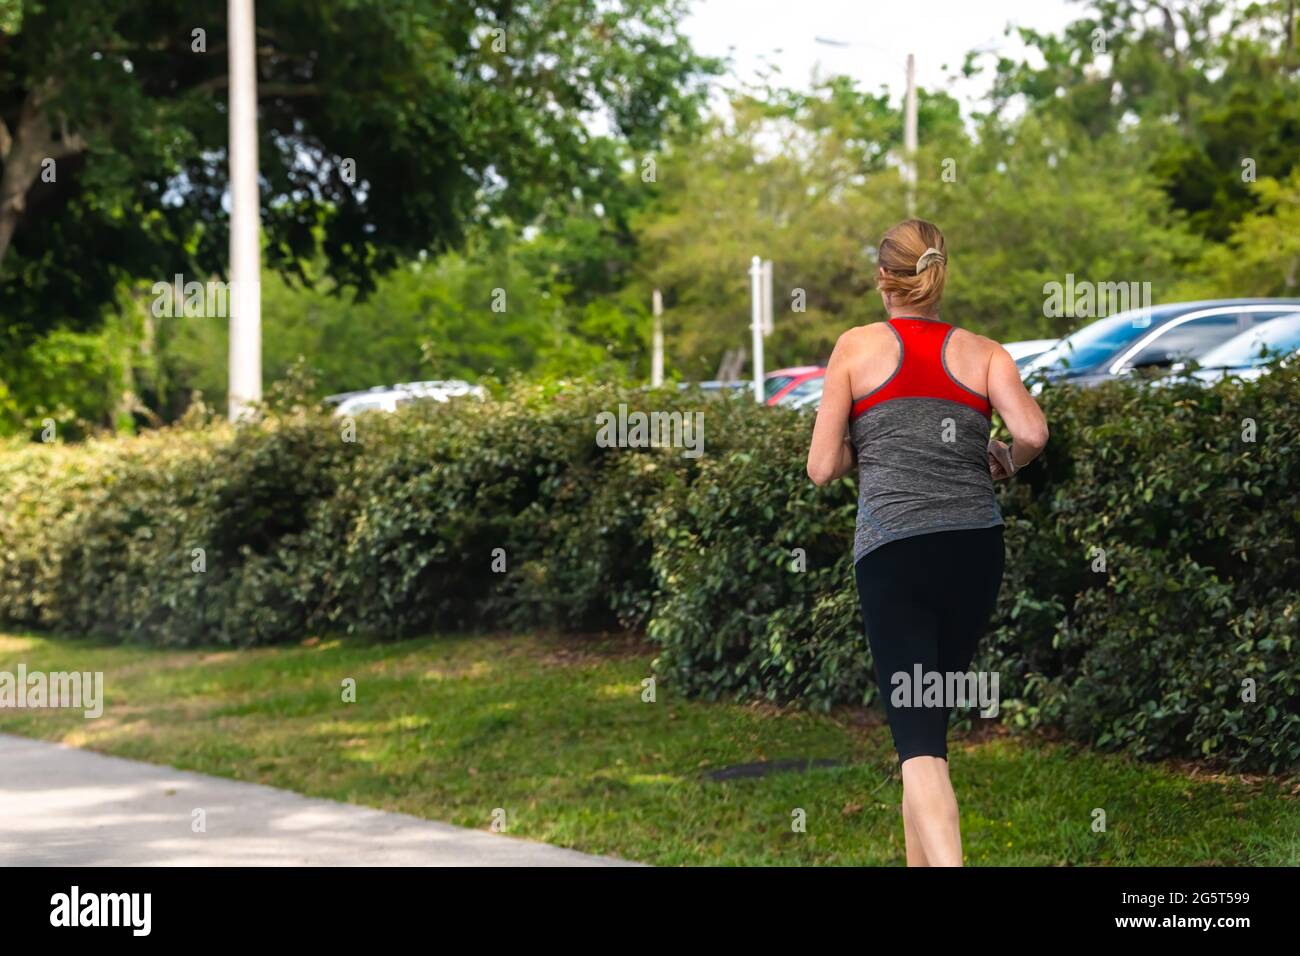 Gainesville, USA - April 27, 2018: University of Florida UF campus grounds with woman female student running jogging exercising in morning on sidewalk Stock Photo